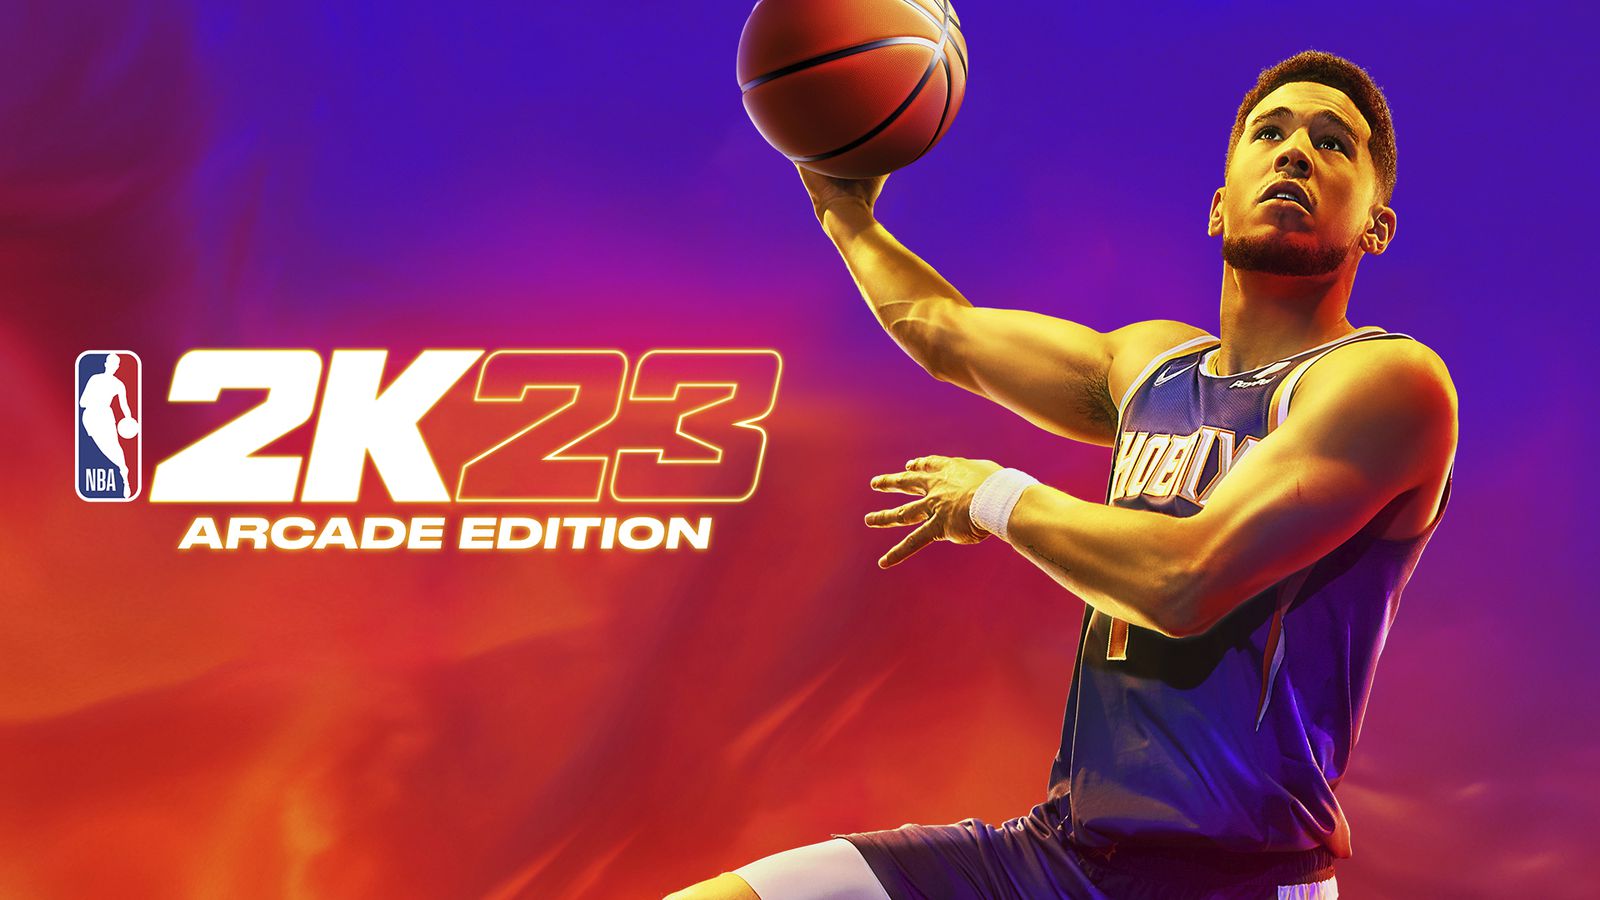 NBA 2K23': Michael Jordan Is The Cover Star Of His Own Edition